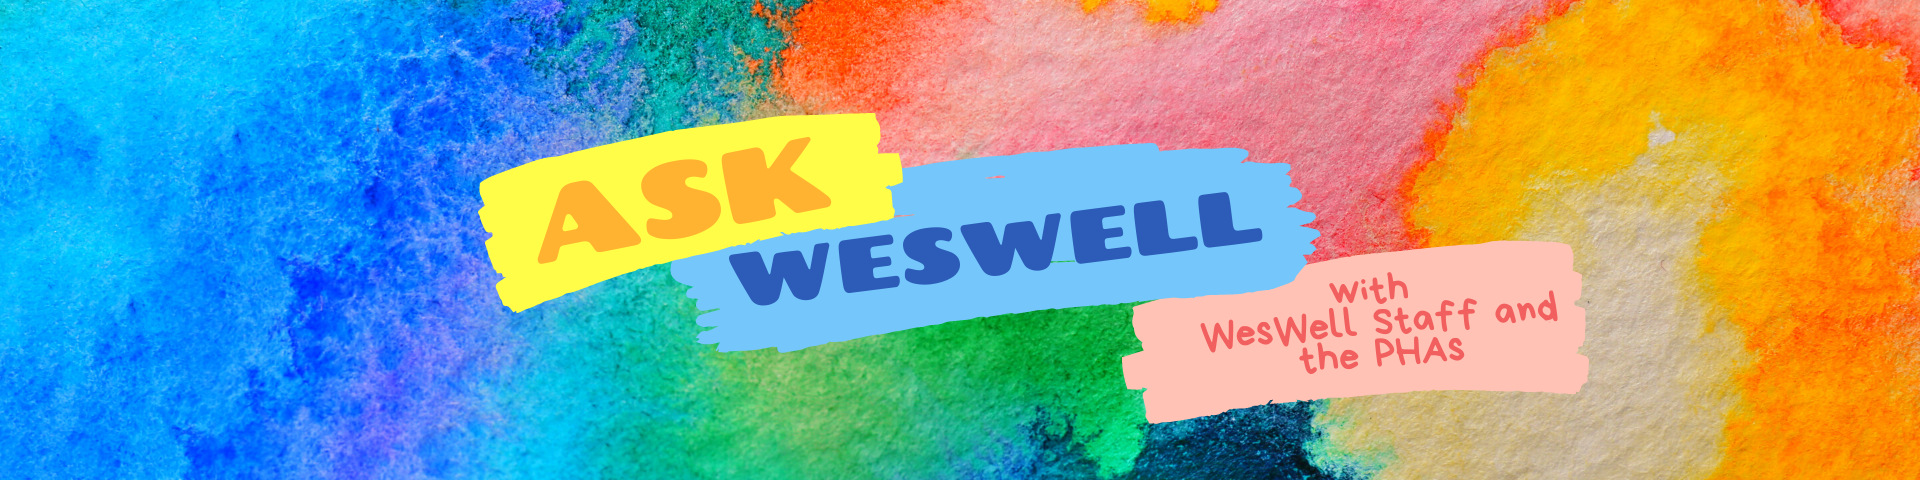 Ask-weswell.png